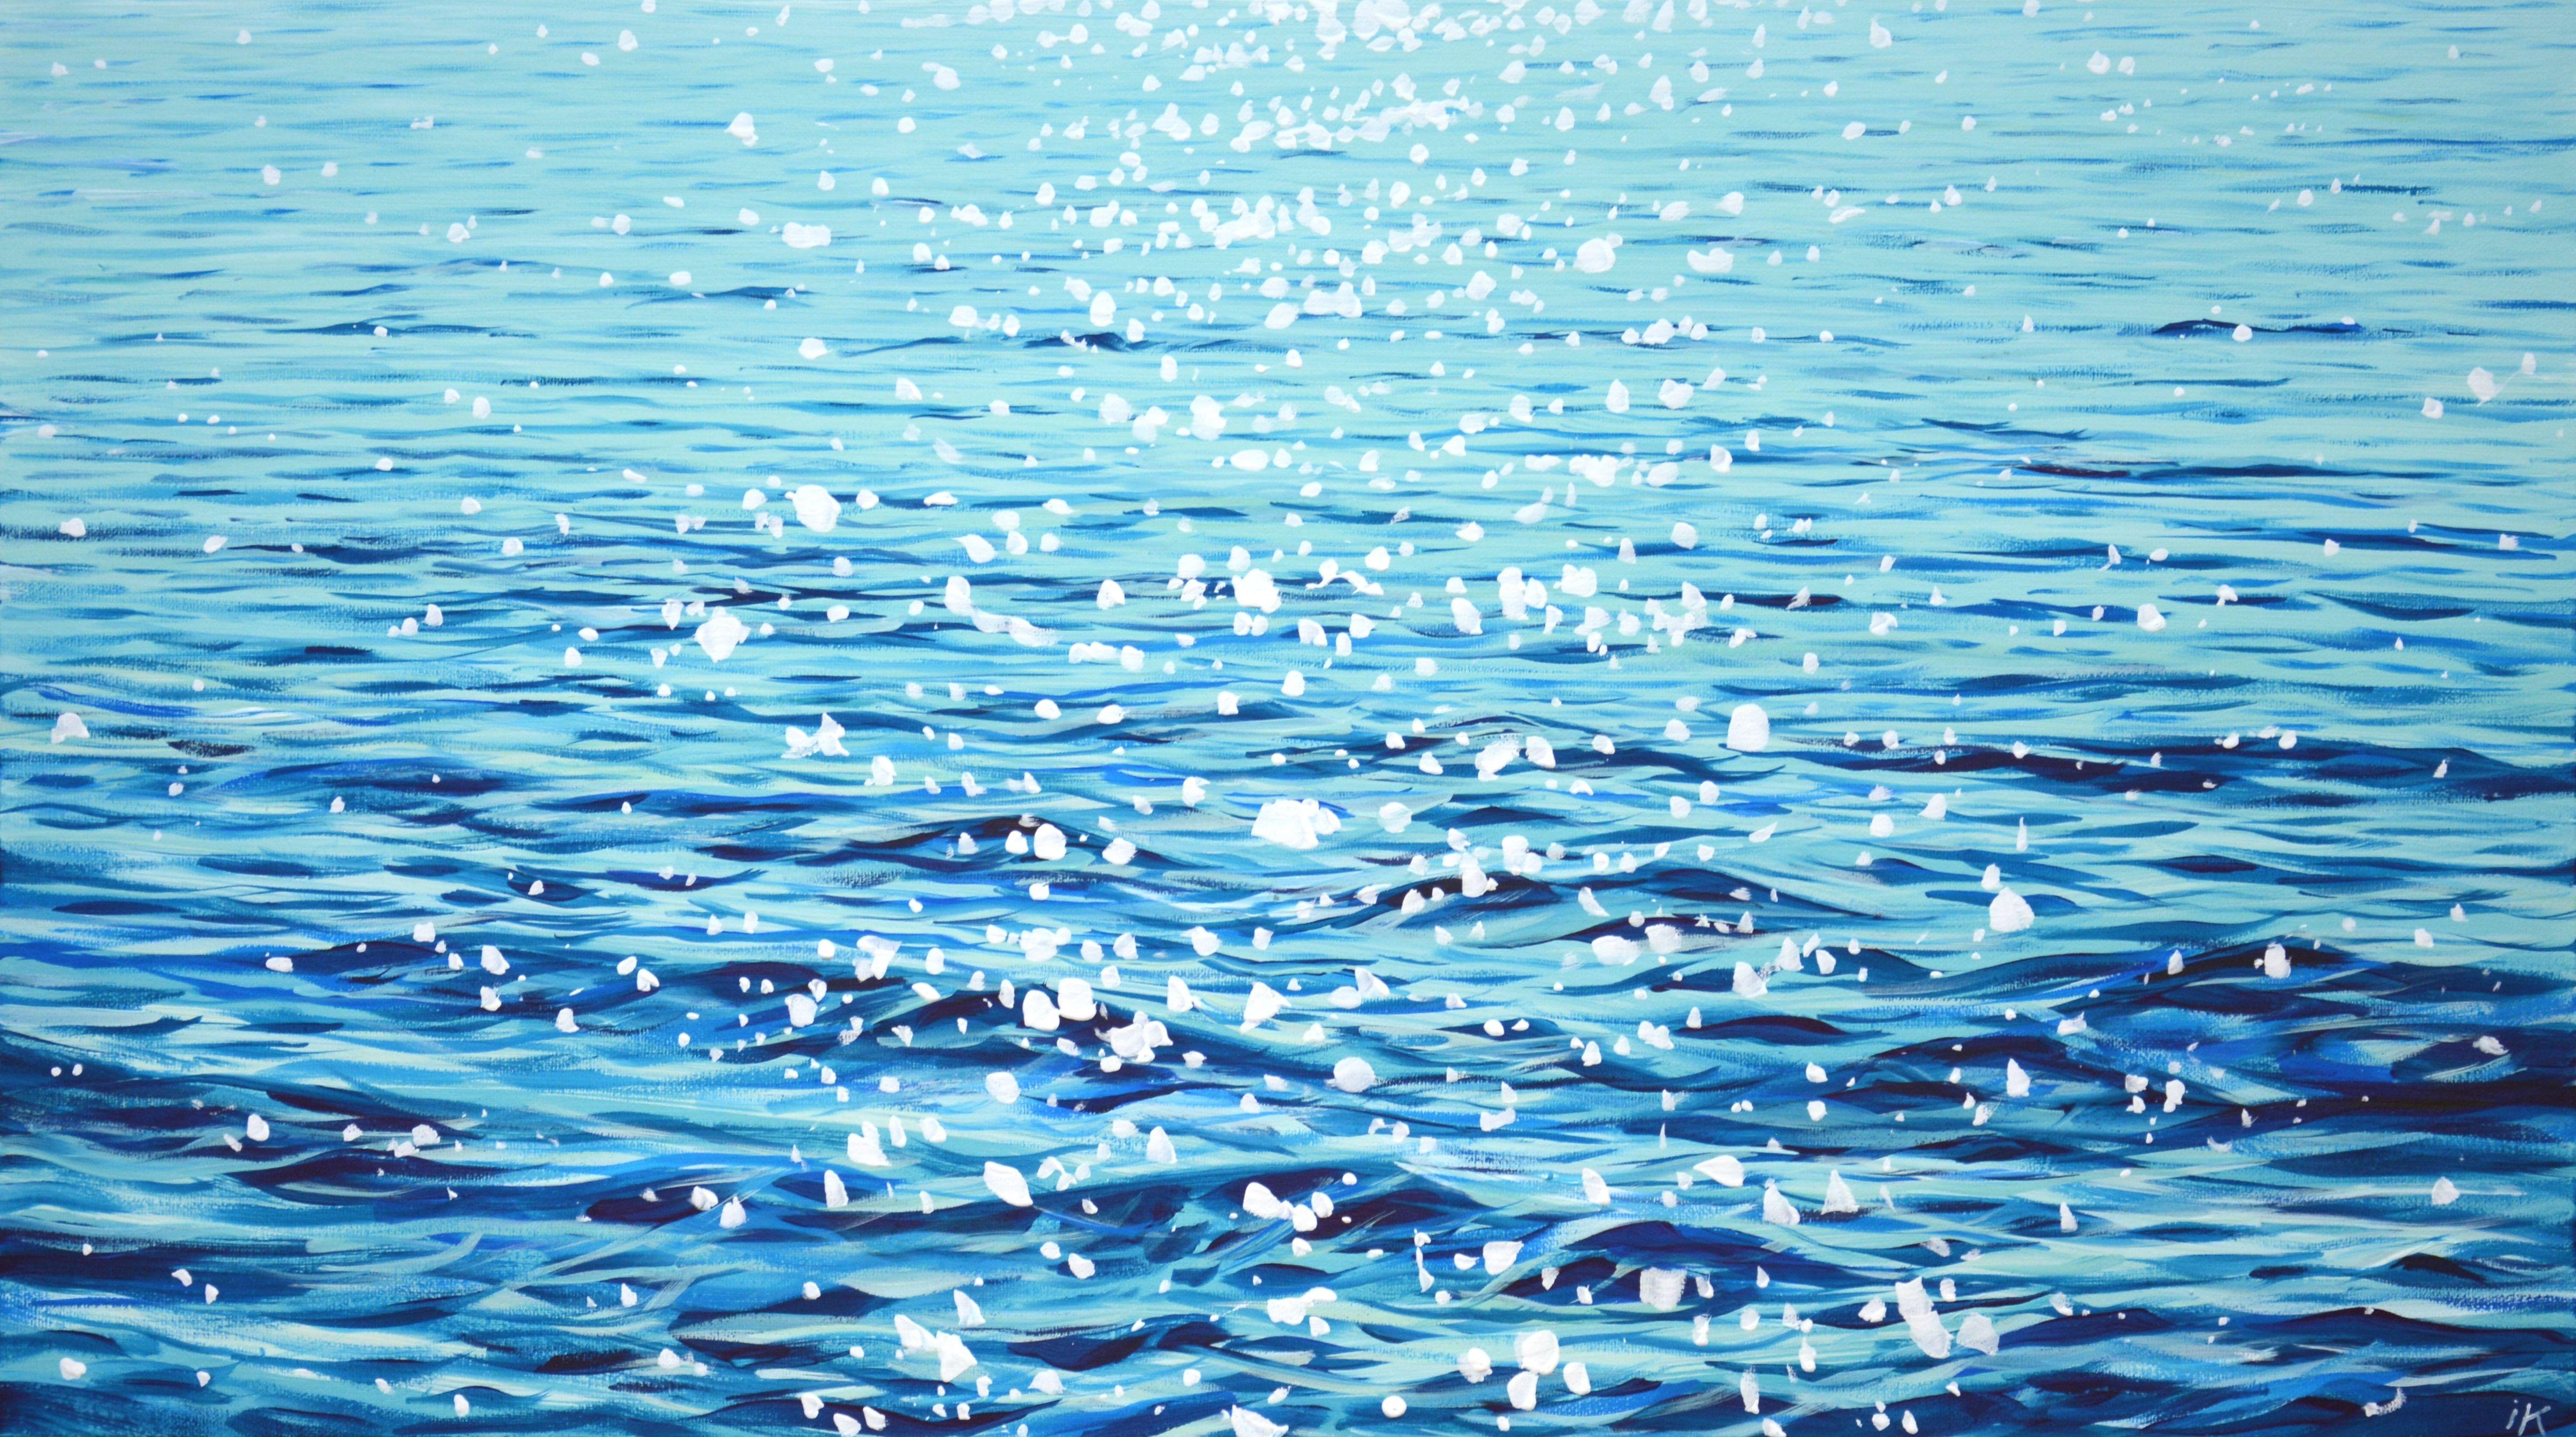 Light on the water. Ocean, sea, water, turquoise, small waves, reflections on the water create an atmosphere of relaxation and romance. Midday light flickers over the surface of the water, revealing a serene view. Made in the style of realism, light